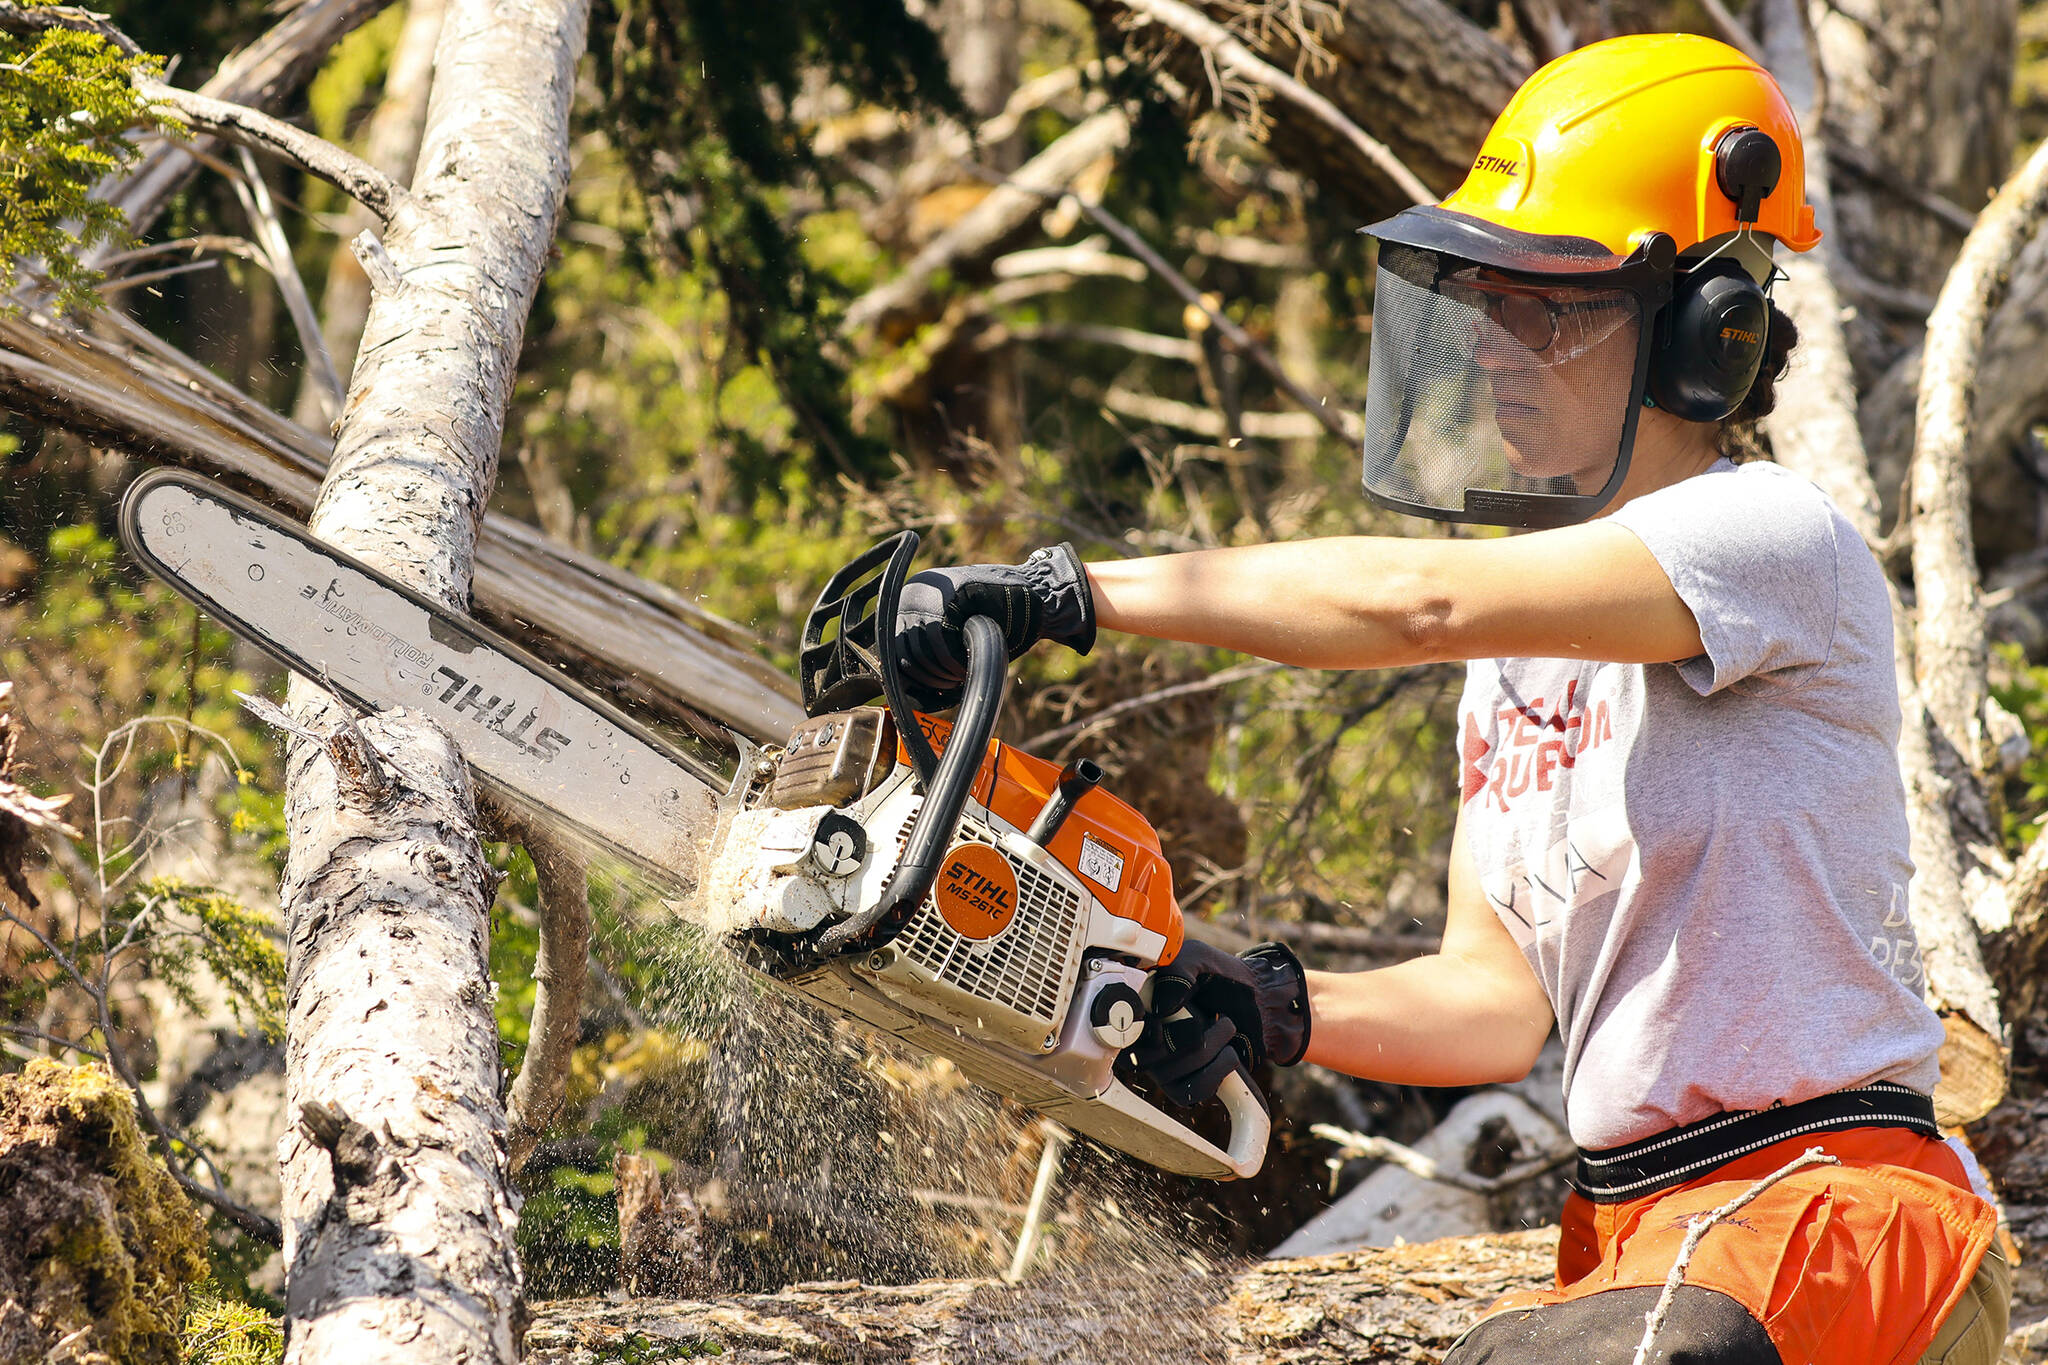 Sylvia Heinz, Team Rubicon's deputy administrator for Alaska, hones her chainsaw technique on a downed tree as part of a training event for the disaster-relief organization on Douglas Island on May 25, 2022. (Michael S. Lockett / Juneau Empire)